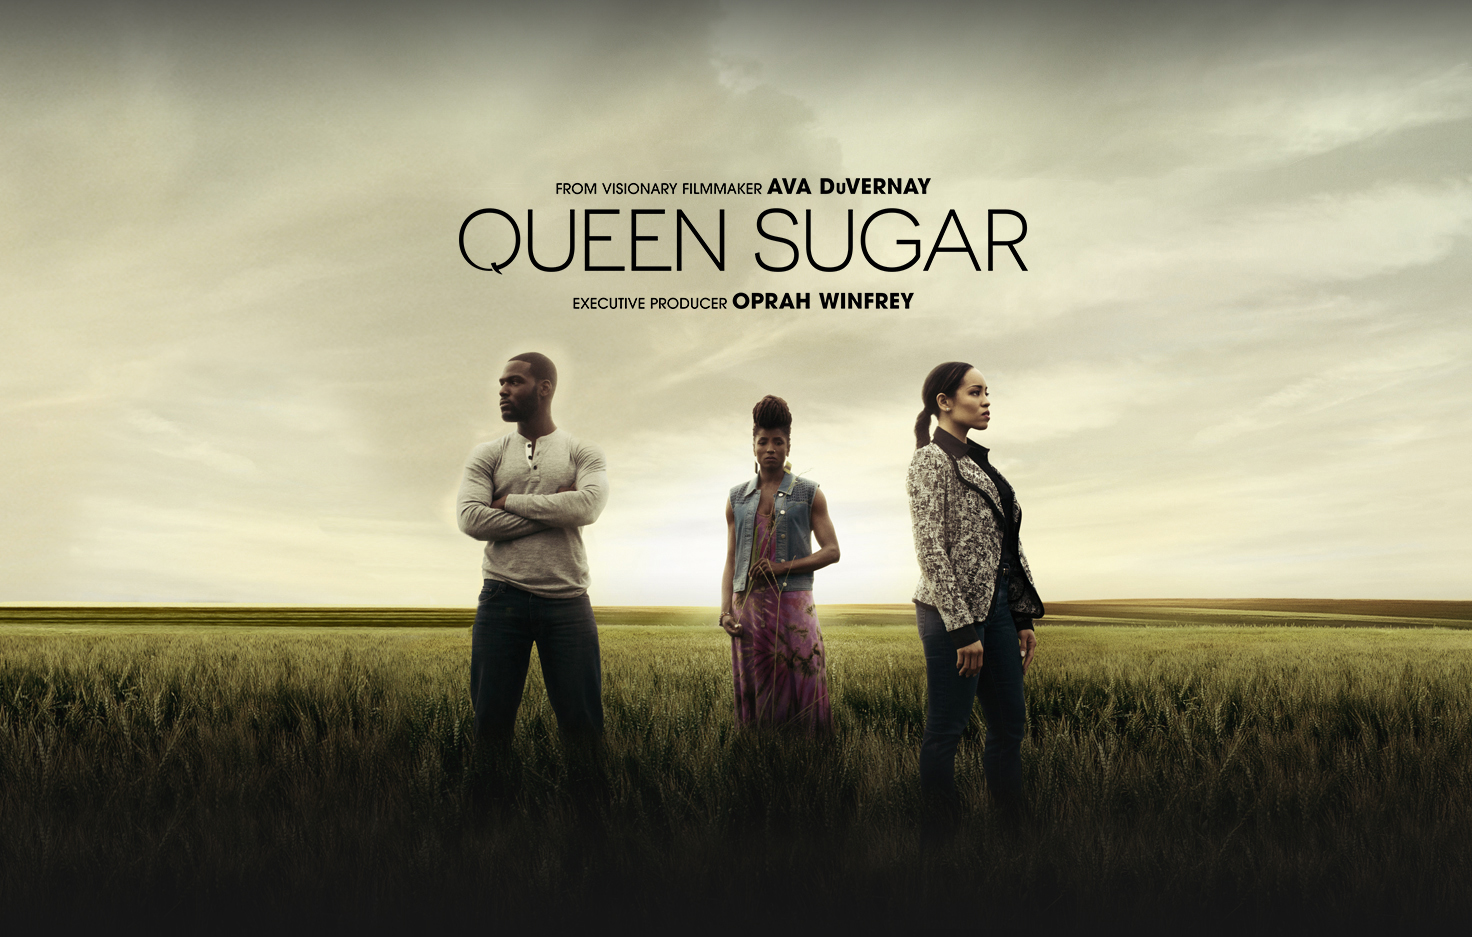 OWN "Queen Sugar" Season 2 Auditions for 2019